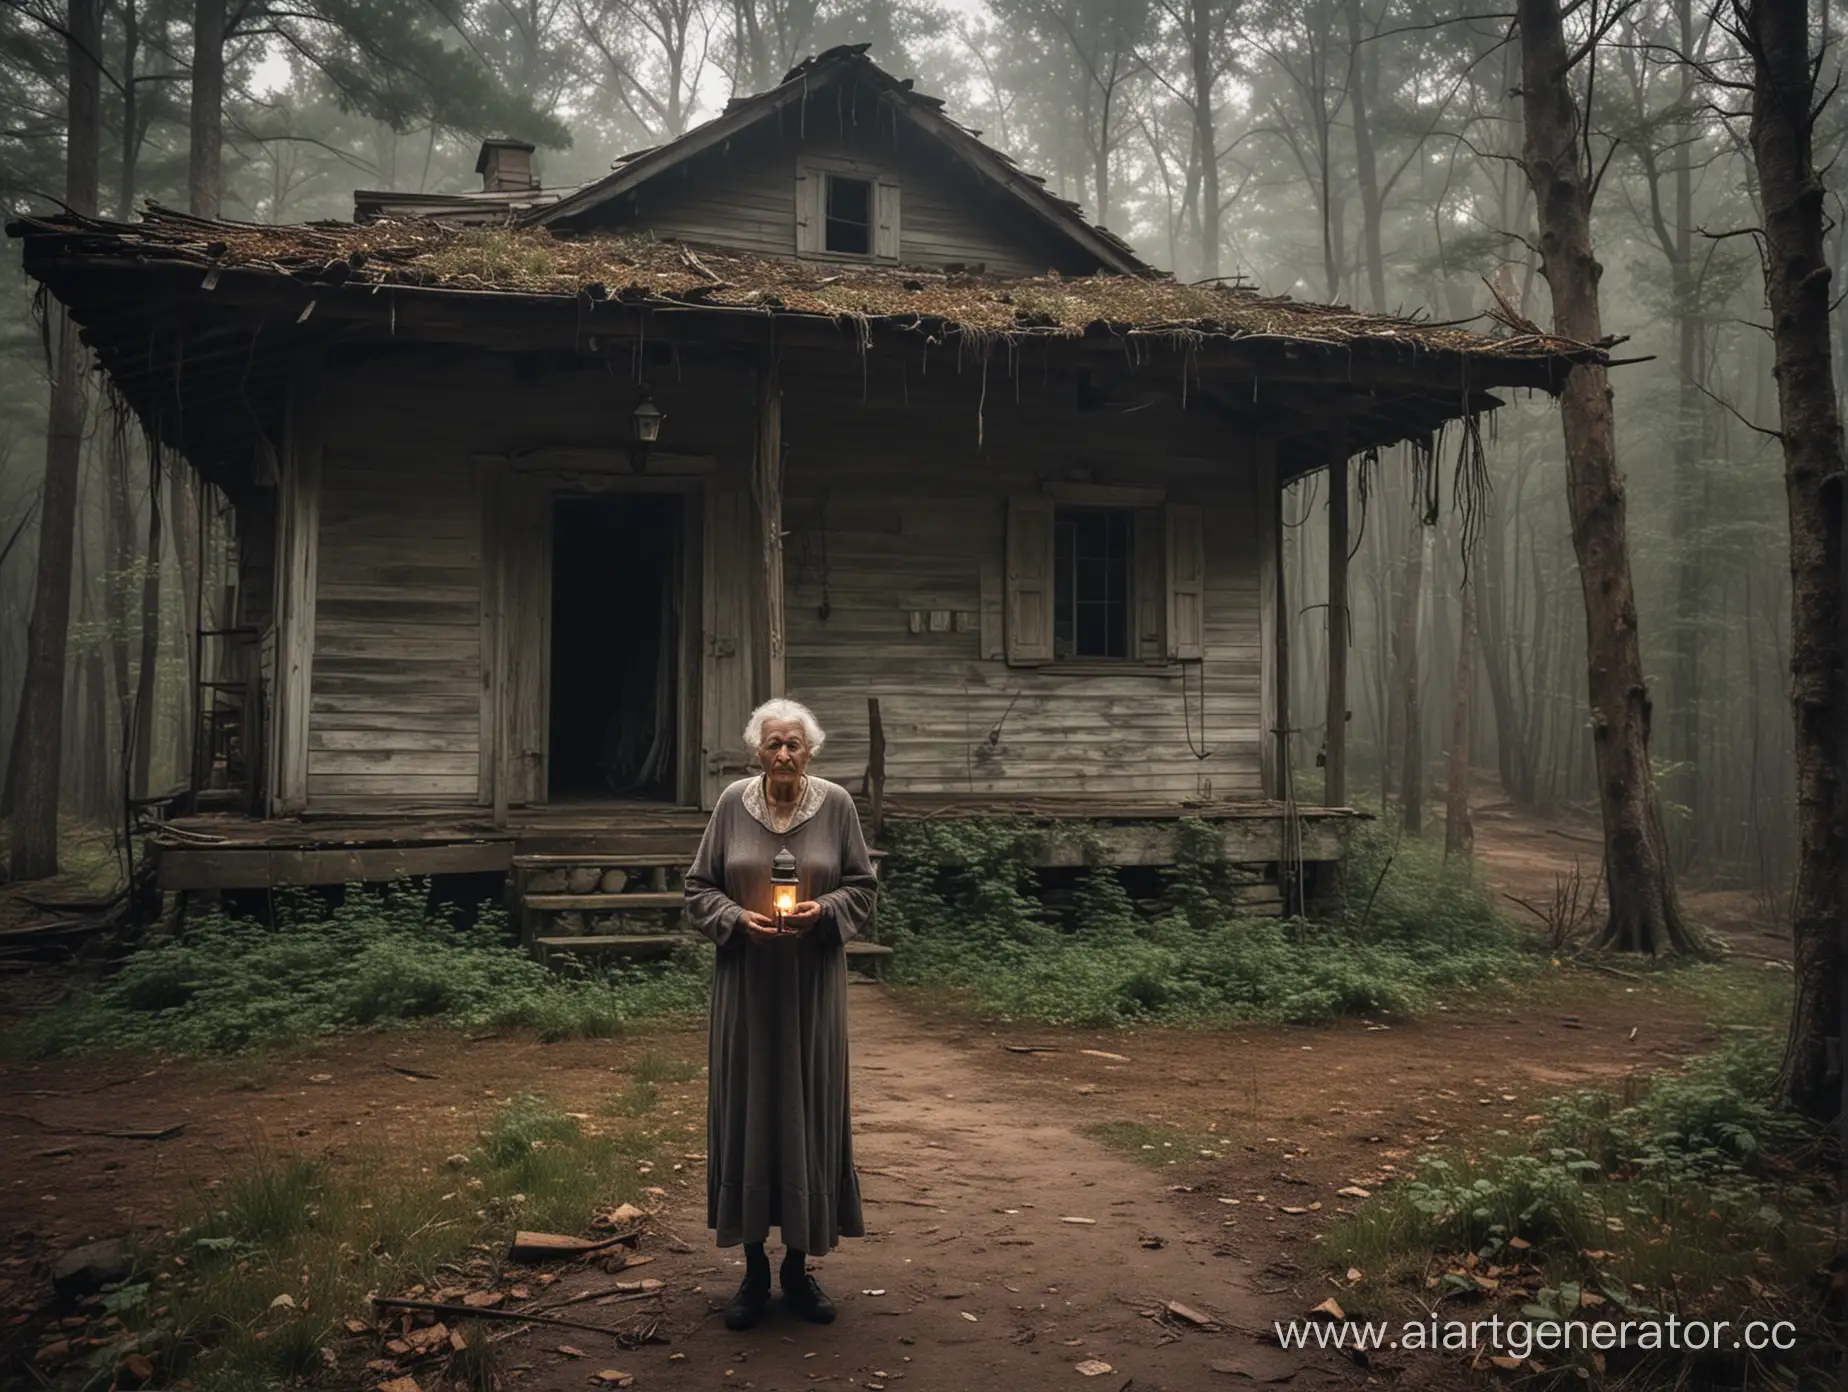 Eerie-Abandoned-Forest-House-with-Mysterious-Grandmother-Holding-Lamp